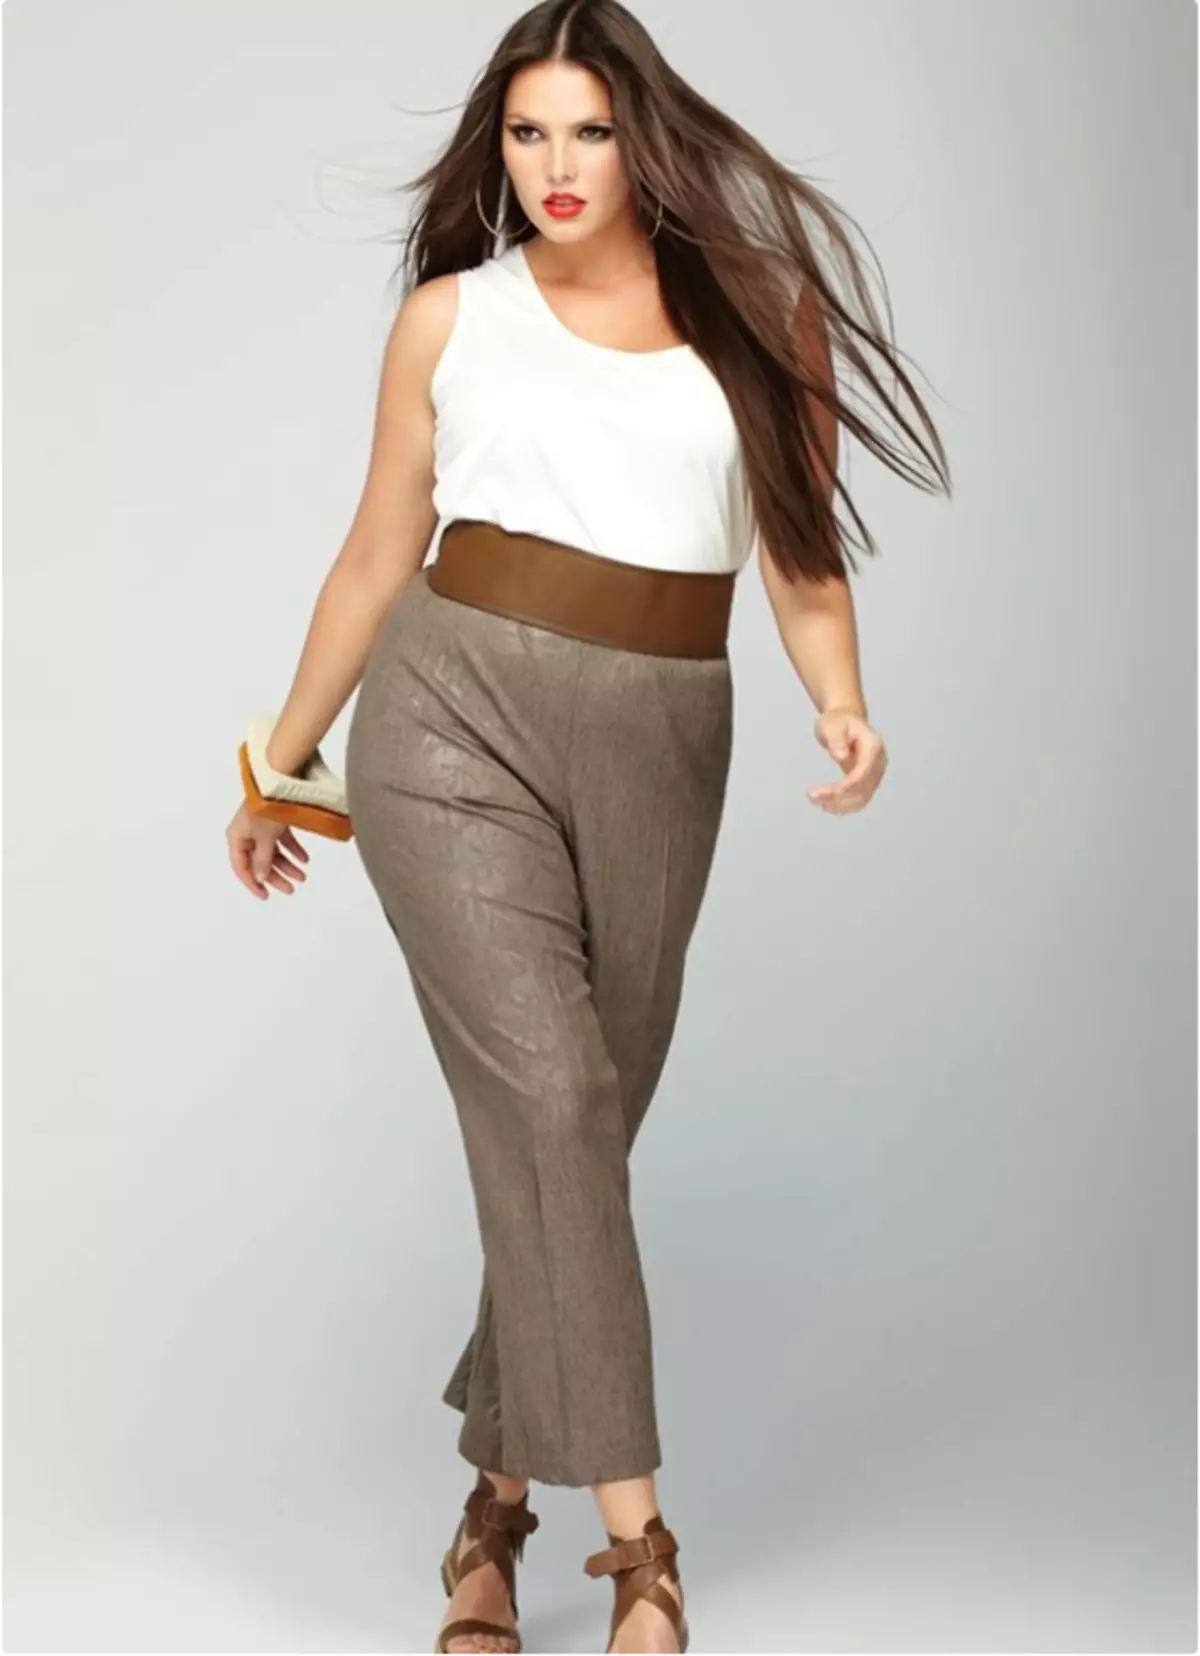 Fashionable pants 7/8 for full women 2021 (57 photos) 13417_55